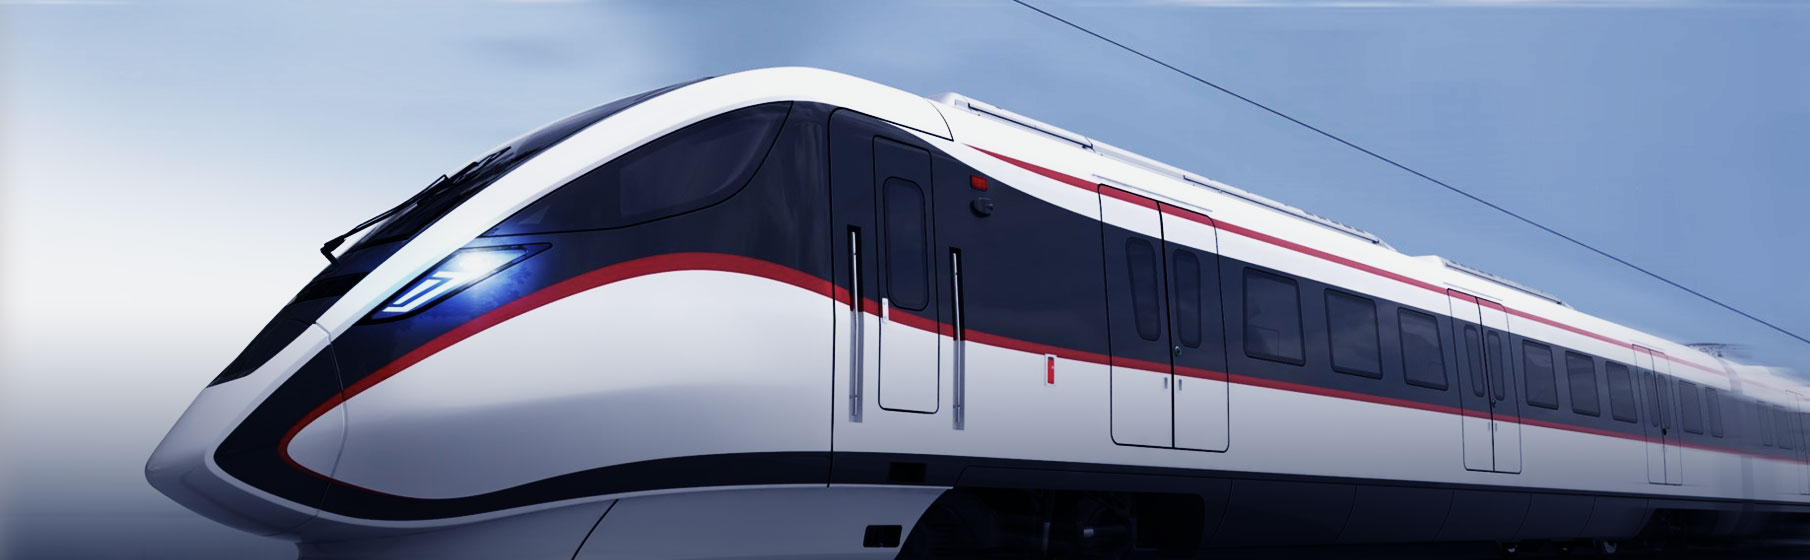 RTTE Signed Strategic Cooperation Agreement with China Railway Materials  International Group Corporation-News-BEIJING RAIL TRANSIT TECHNOLOGY EQUIPMENT  GROUP CO.,LTD.